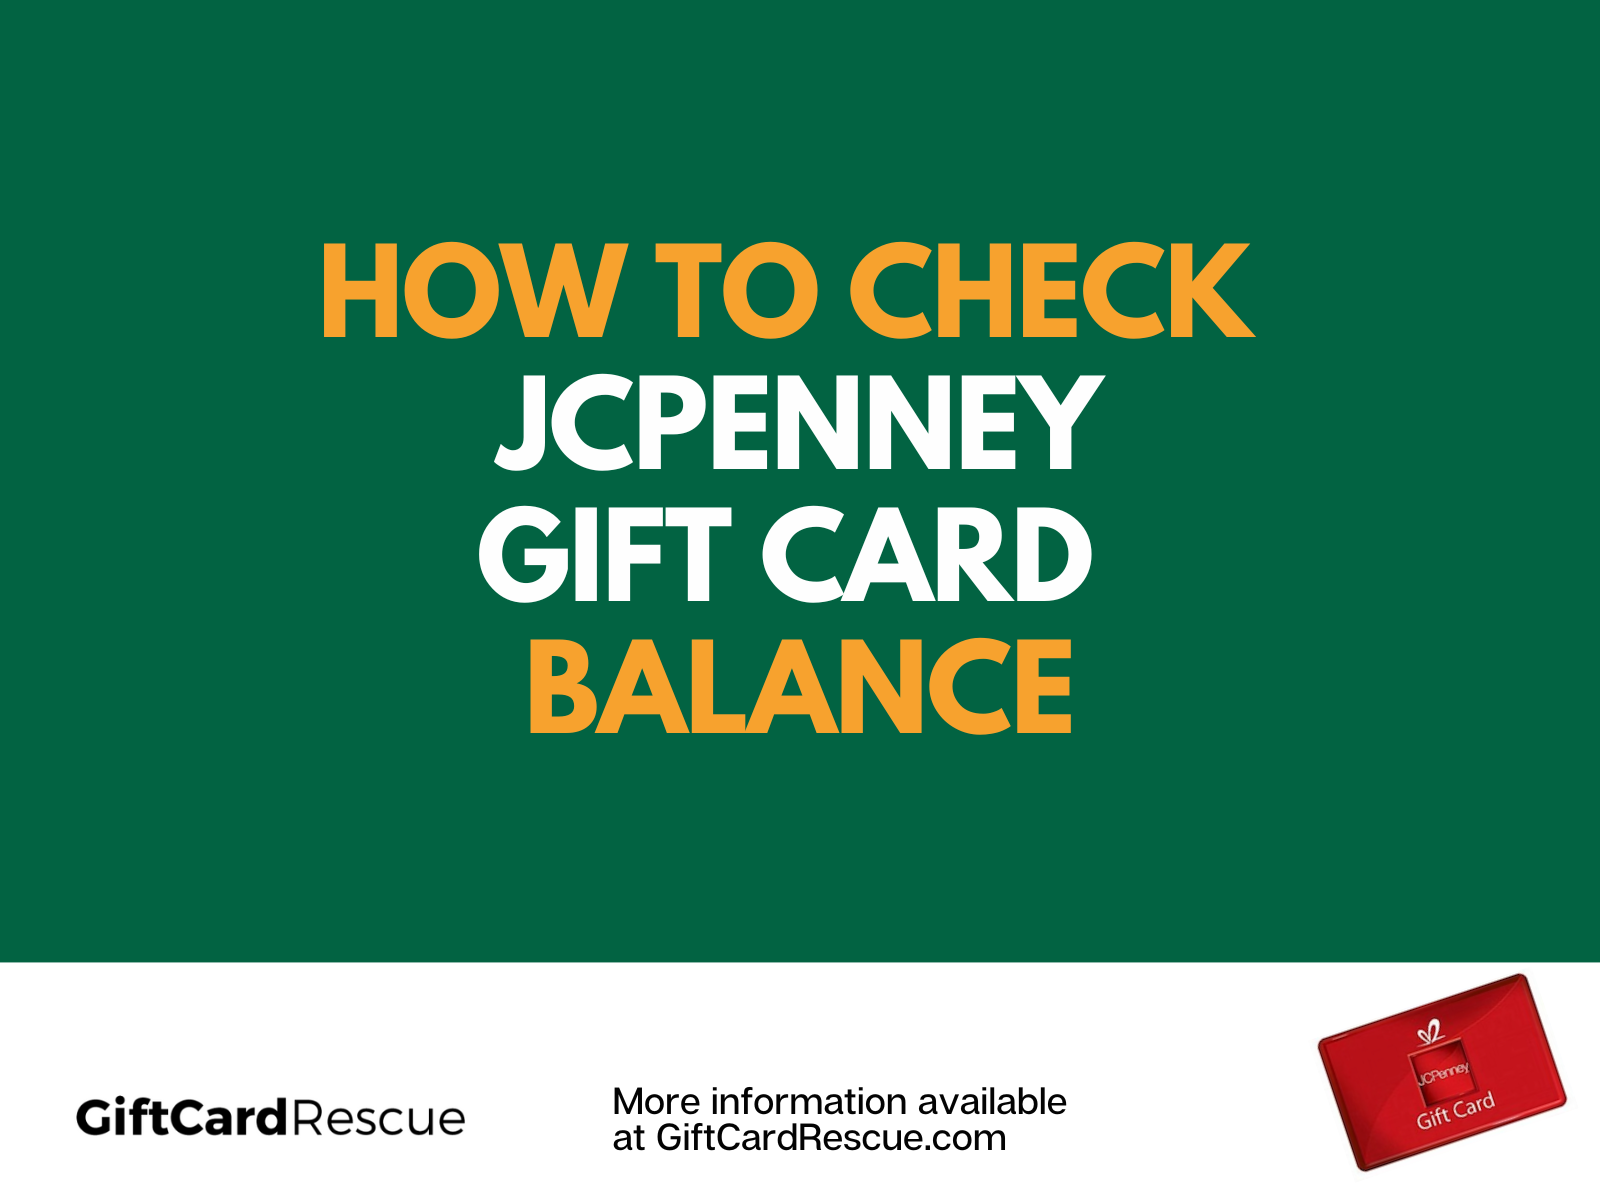 "How to Check JCPenney Gift Card Balance"